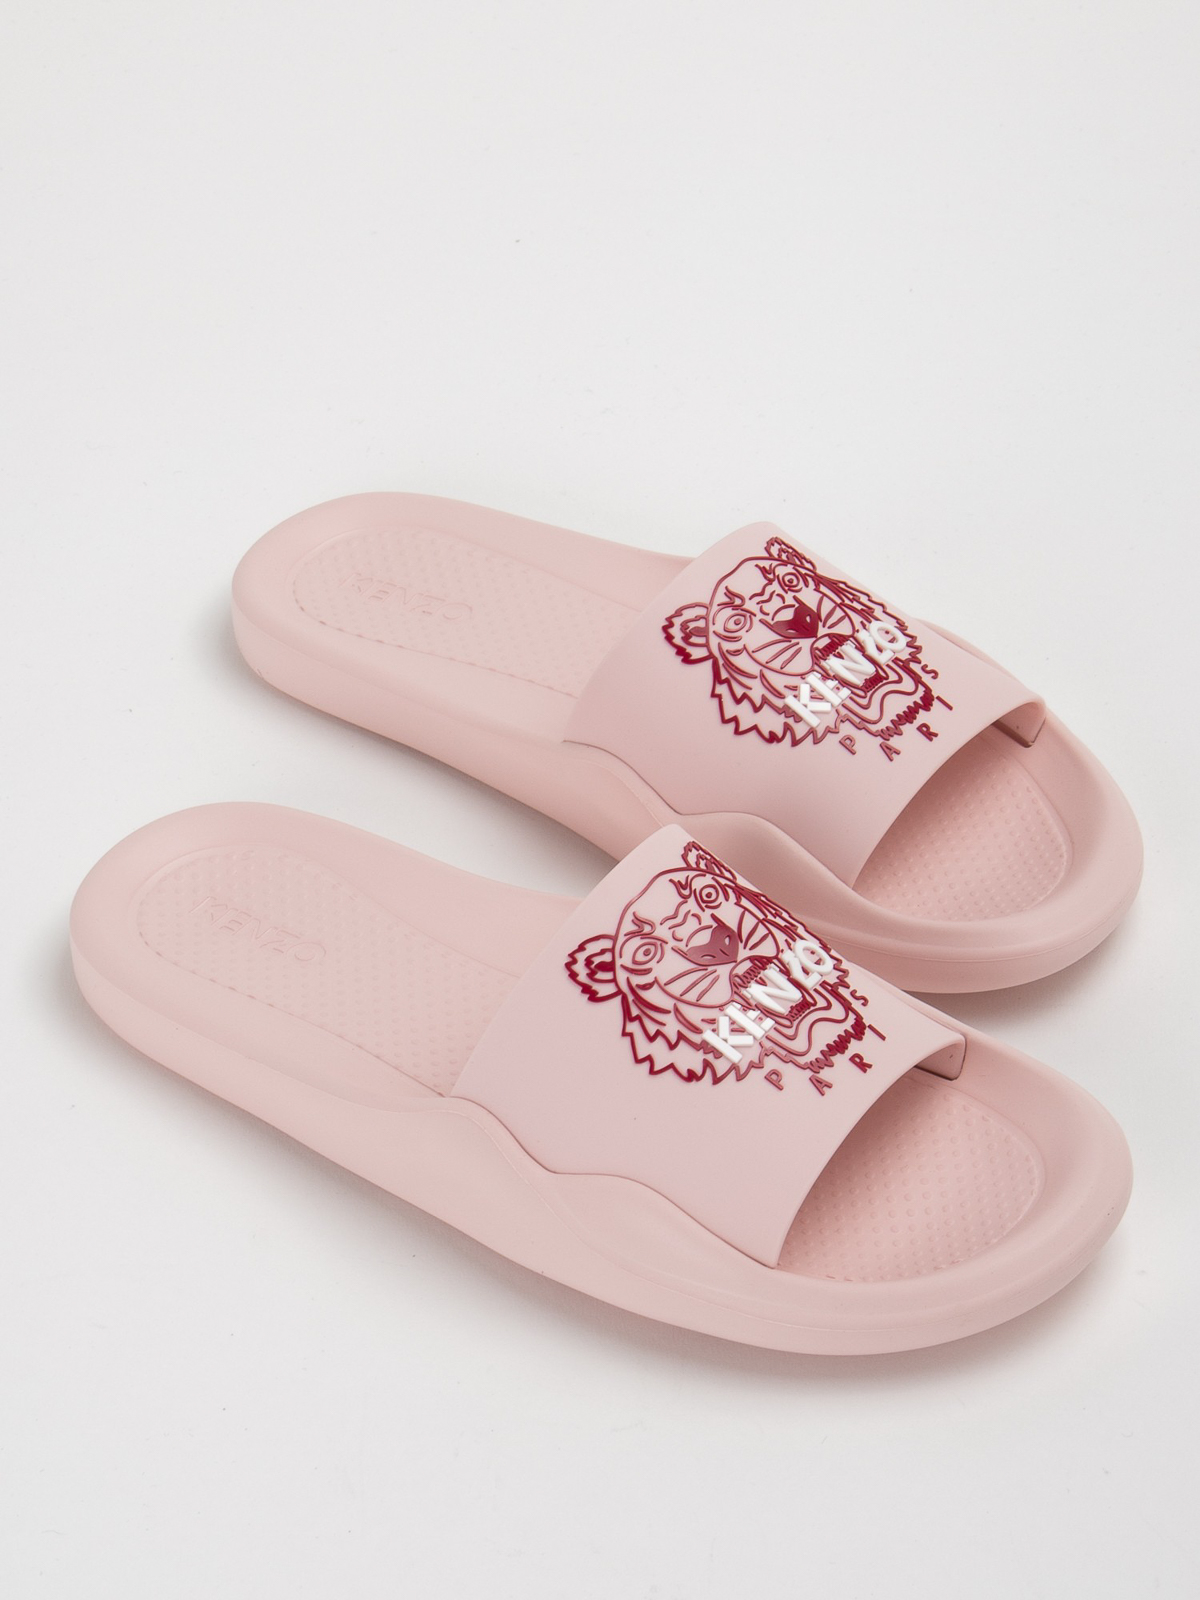 Flip flops Kenzo - Slippers - FC52MU104P6034A | Shop online at THEBS | Sneaker